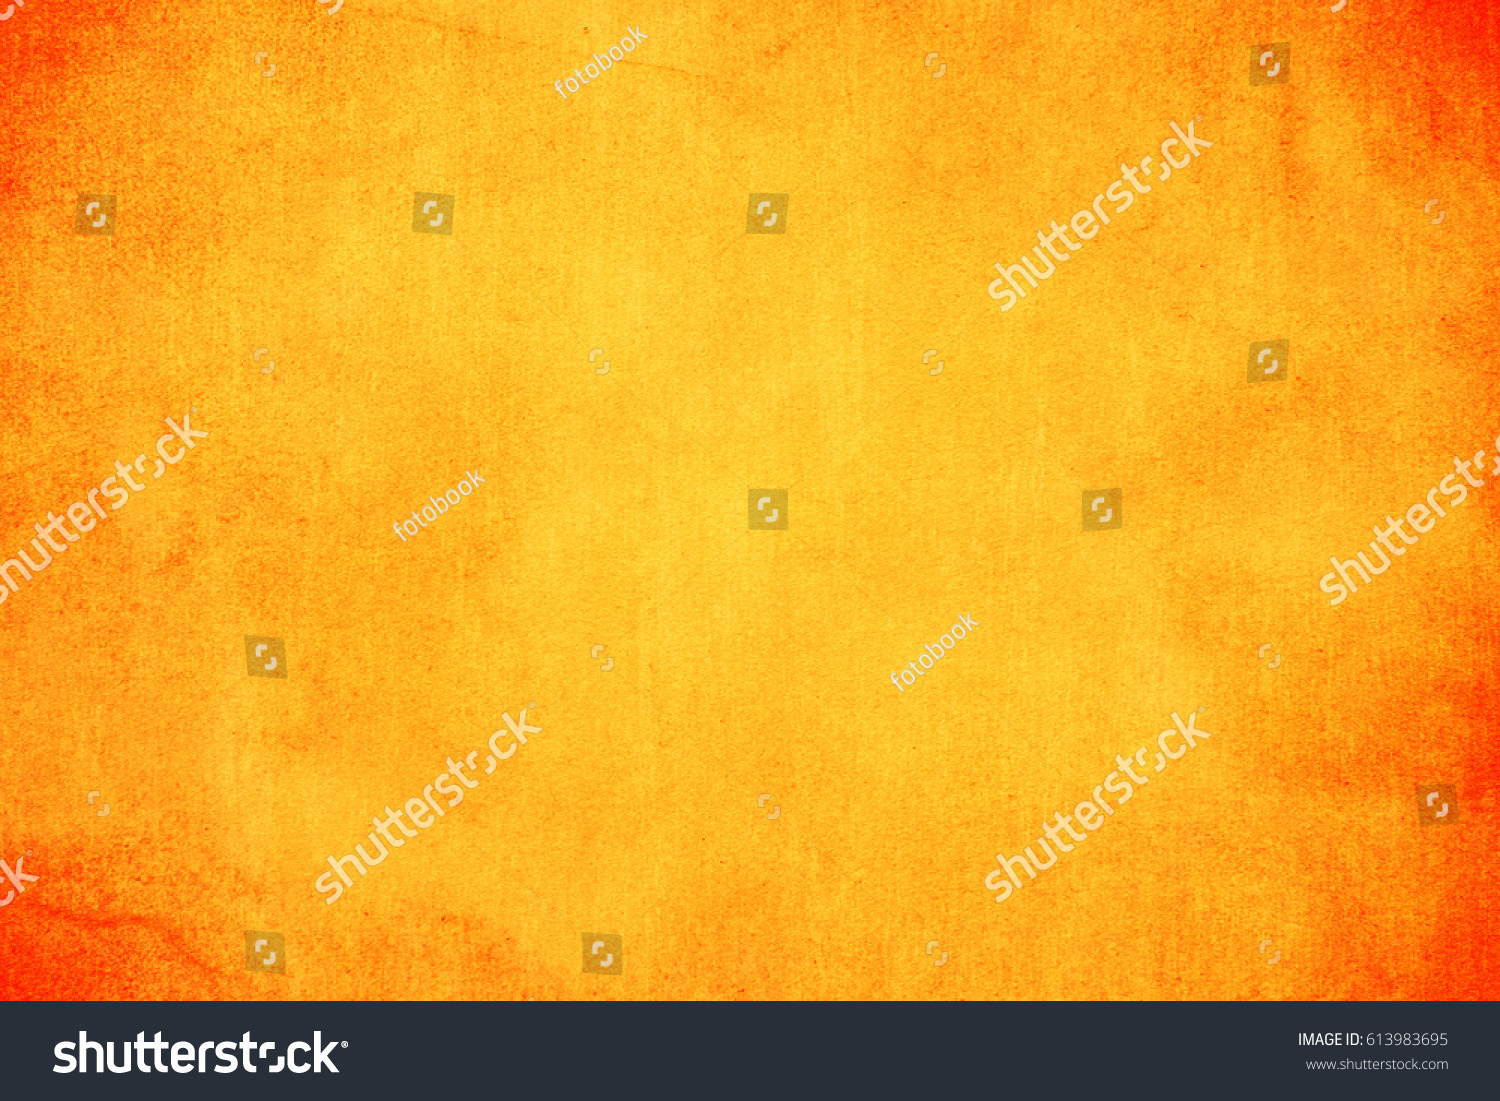 Yellow paper texture. #613983695